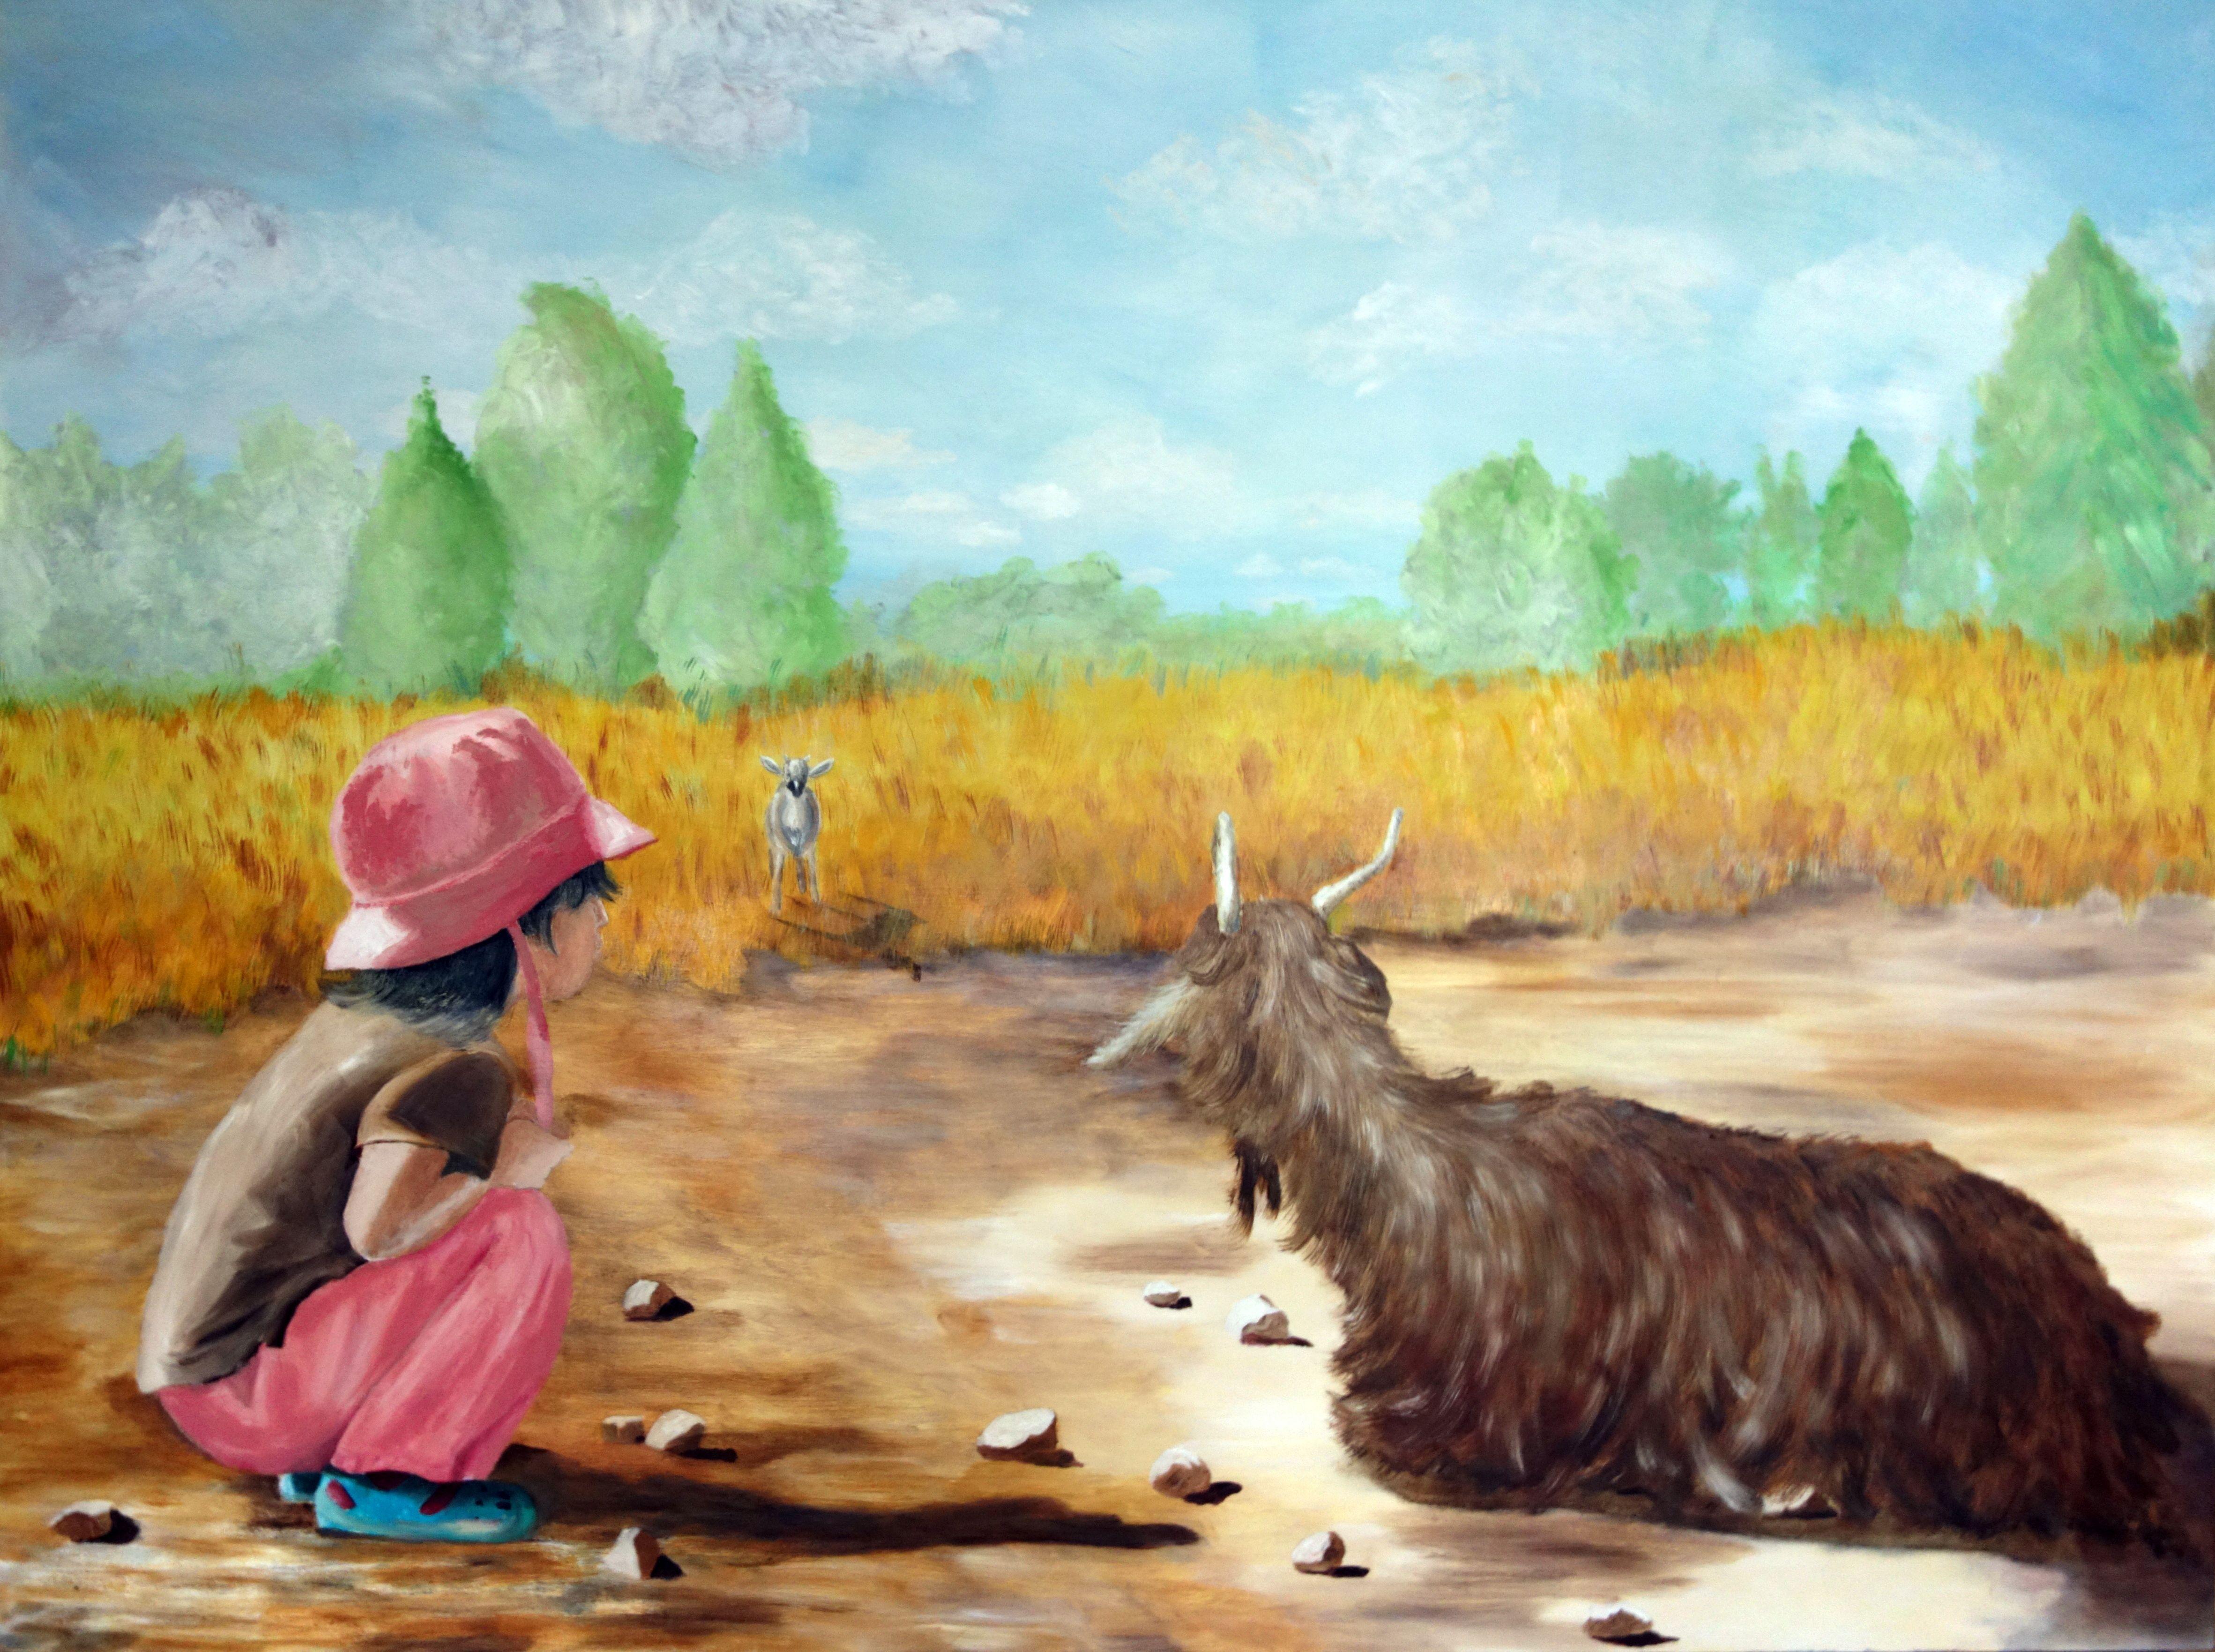 Children seem to be always mesmerized by animals regardless of the animal's temperament.  I wanted to set up a composition that would represent a condition for parental angst.  A nanny goat separated from its kid while a child makes observations